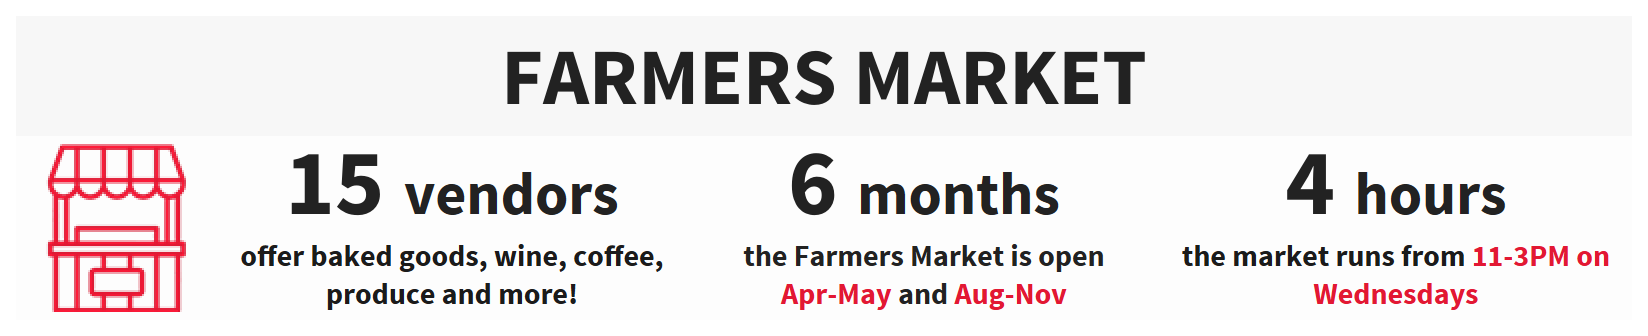 Farmers Market 10-Year Data Infographic